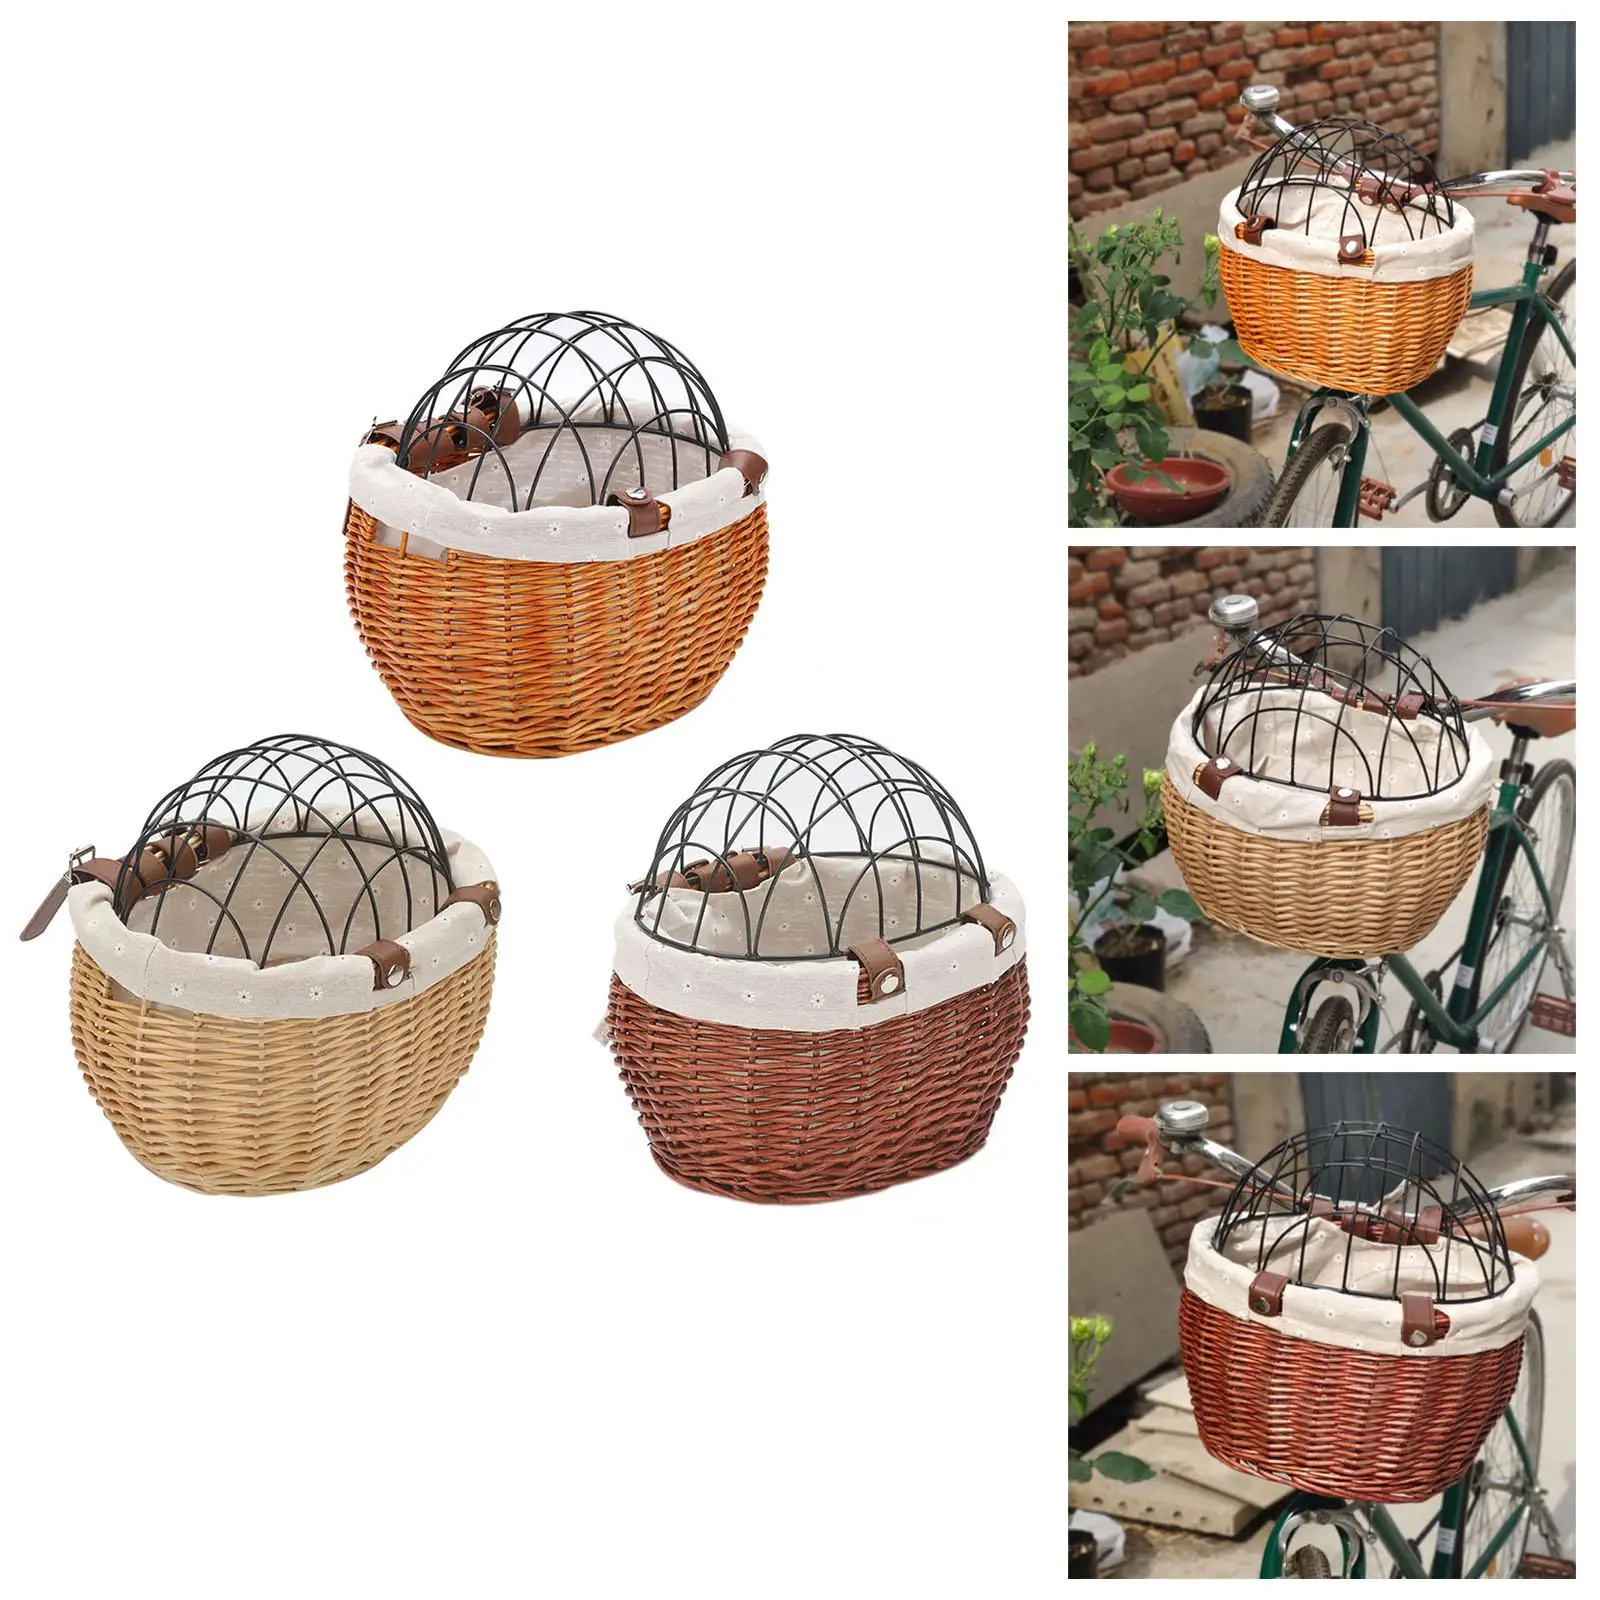 

Pets Dog Storage Basket Iron Crafts with Lid Front Basket Willow Weaving Carryings Pet Puppy Bag for Road Bikes Outdoor